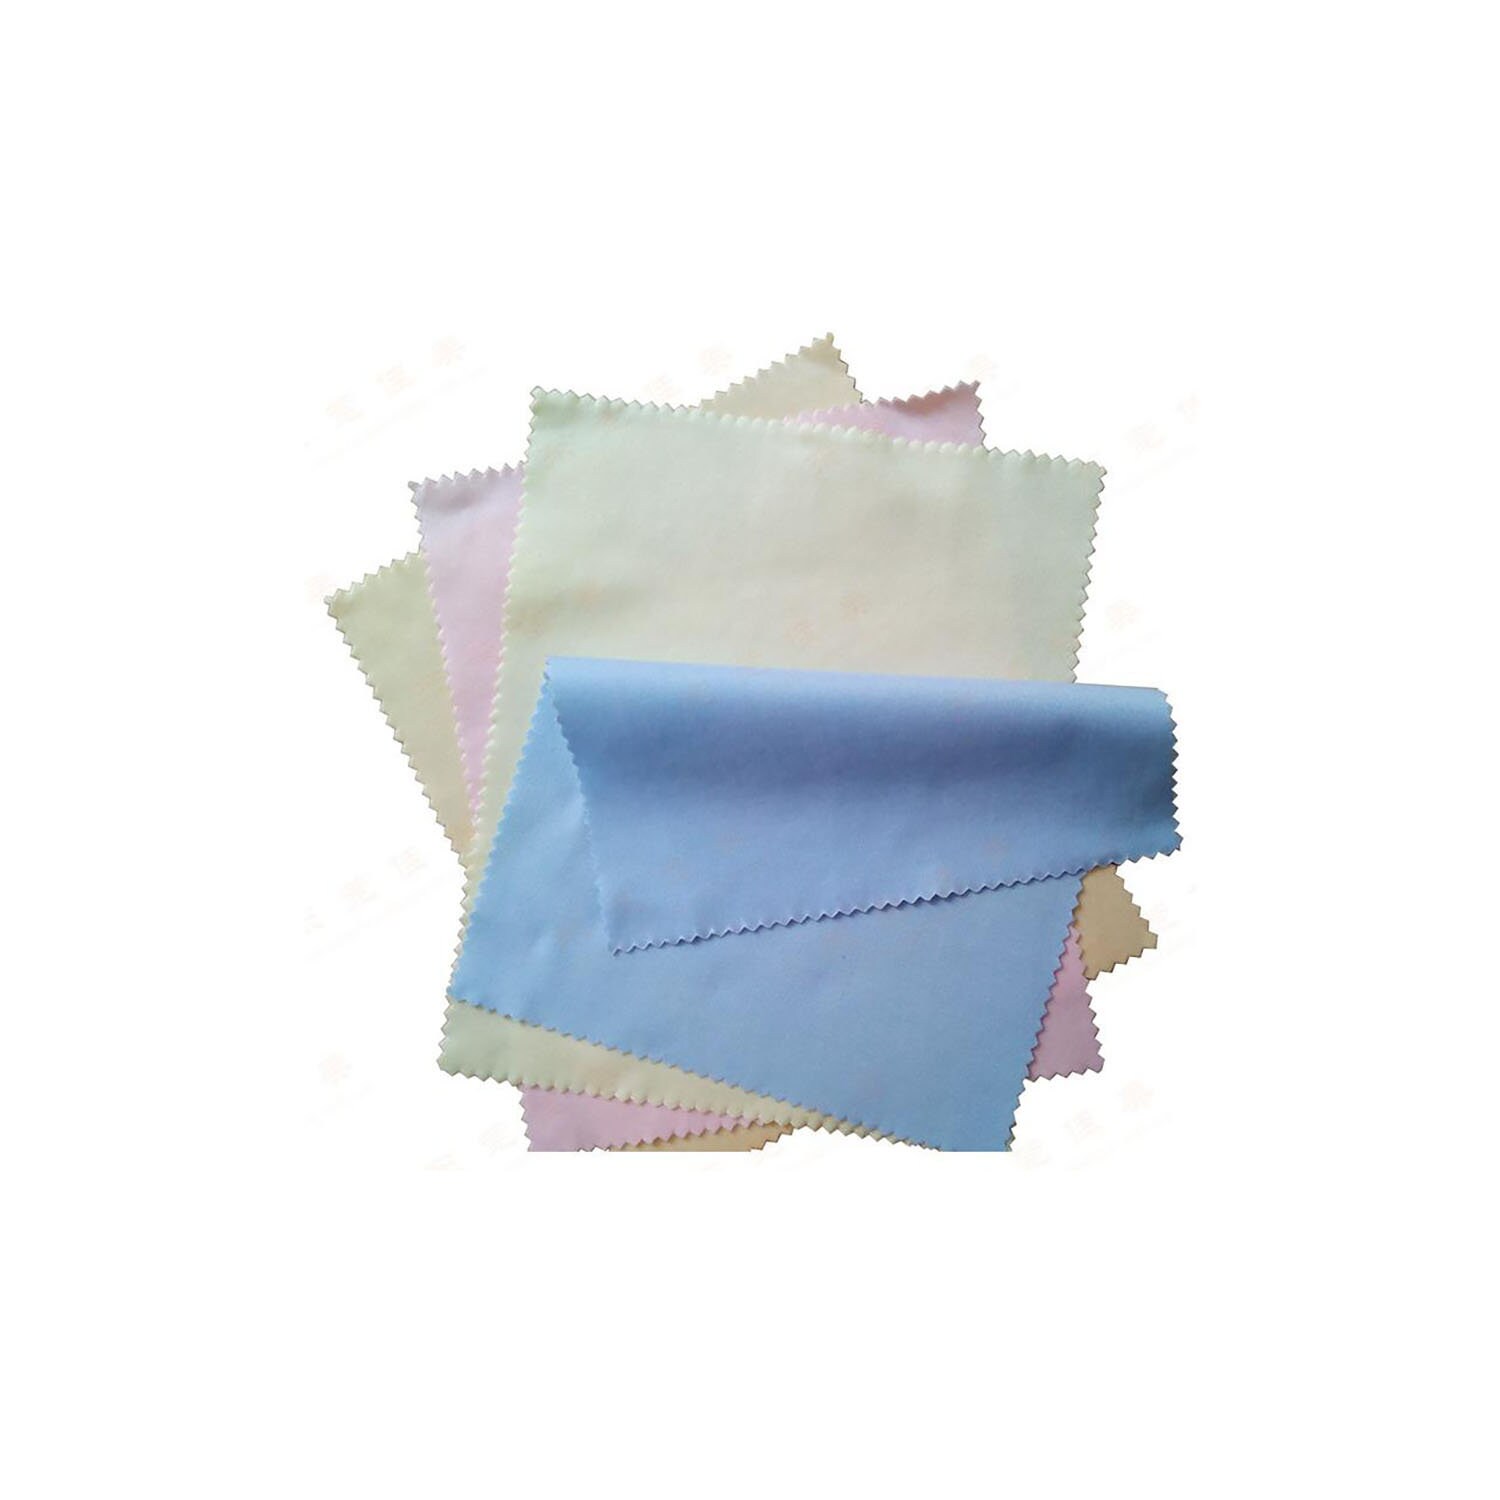 Cotton Cleaning Cloth With Impregnated Cleaner and Anti Tarnish Protector 